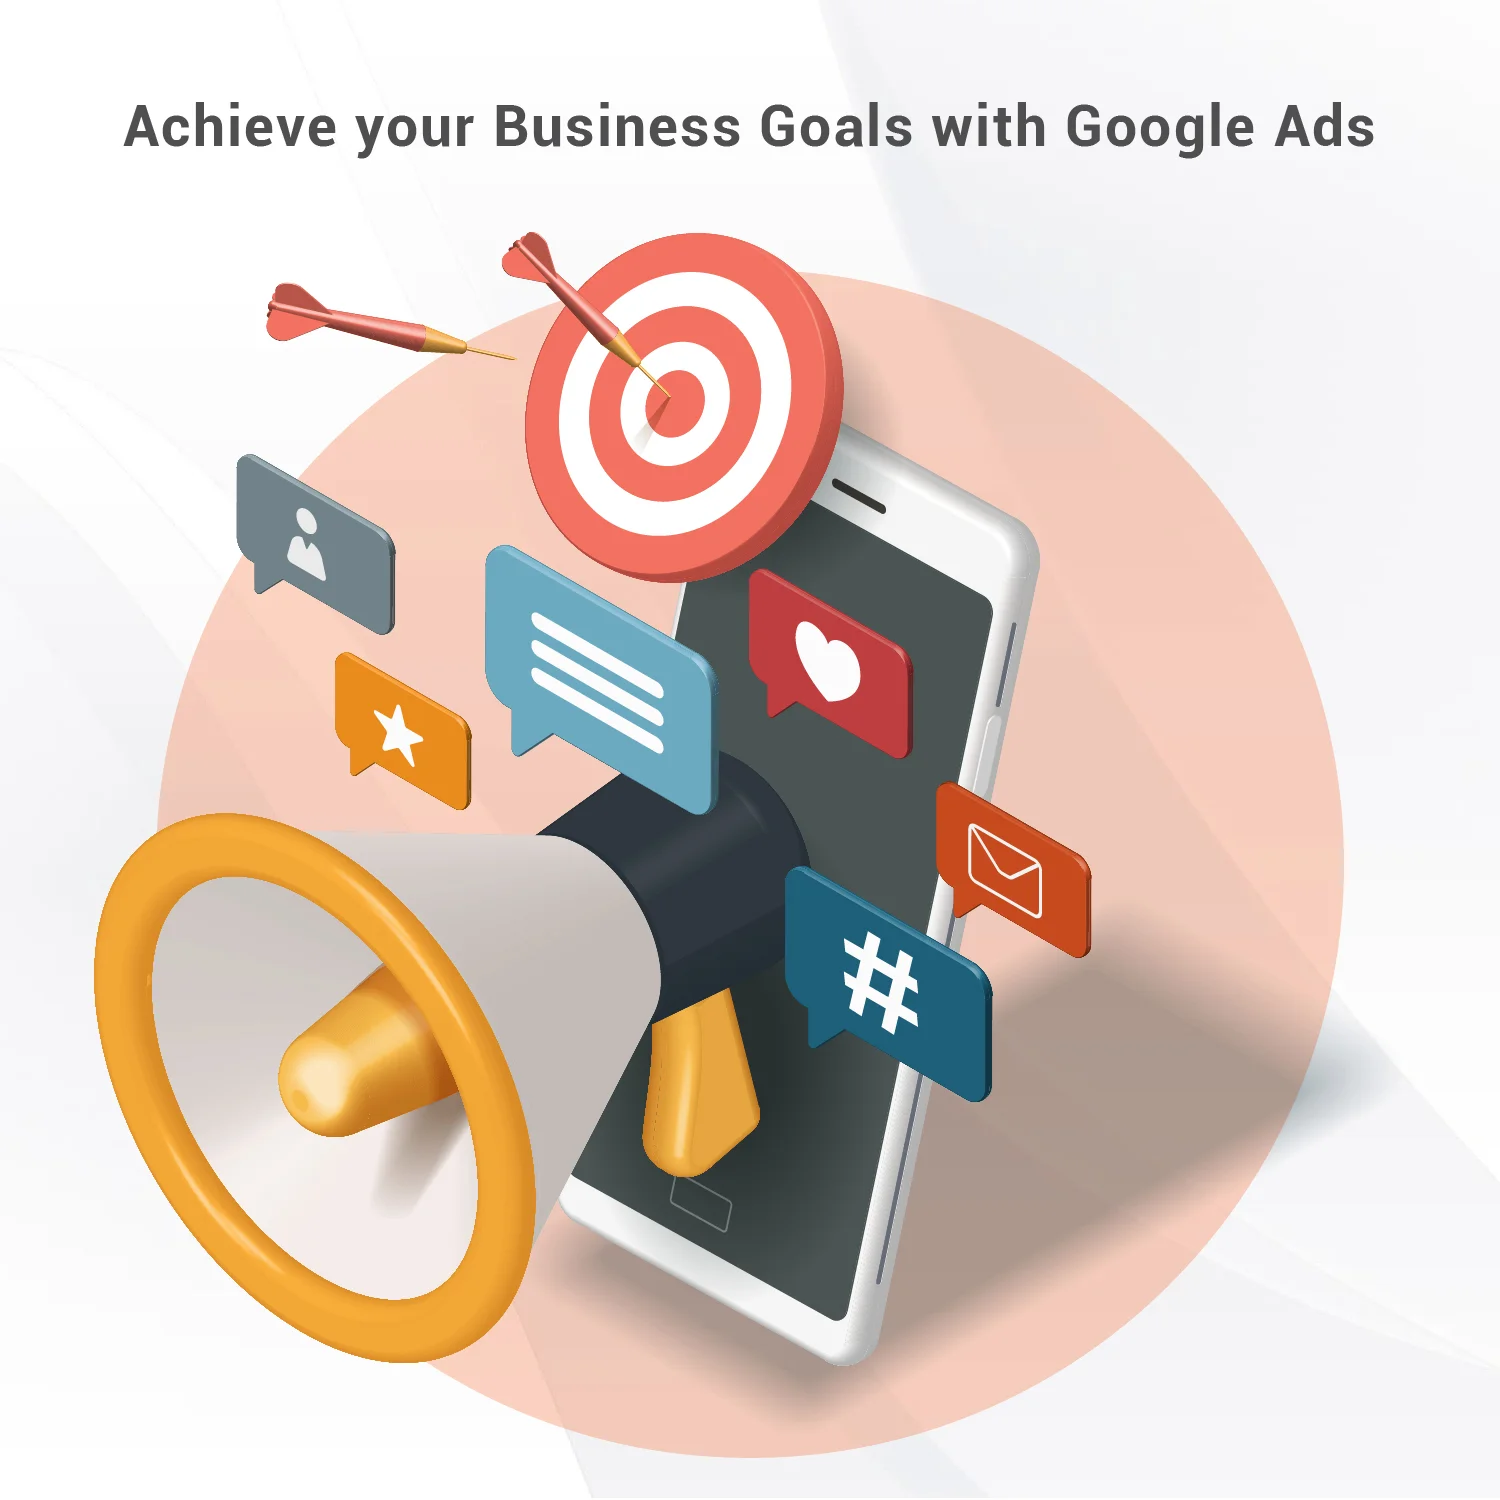 Achieve your Business Goals with Google Ads